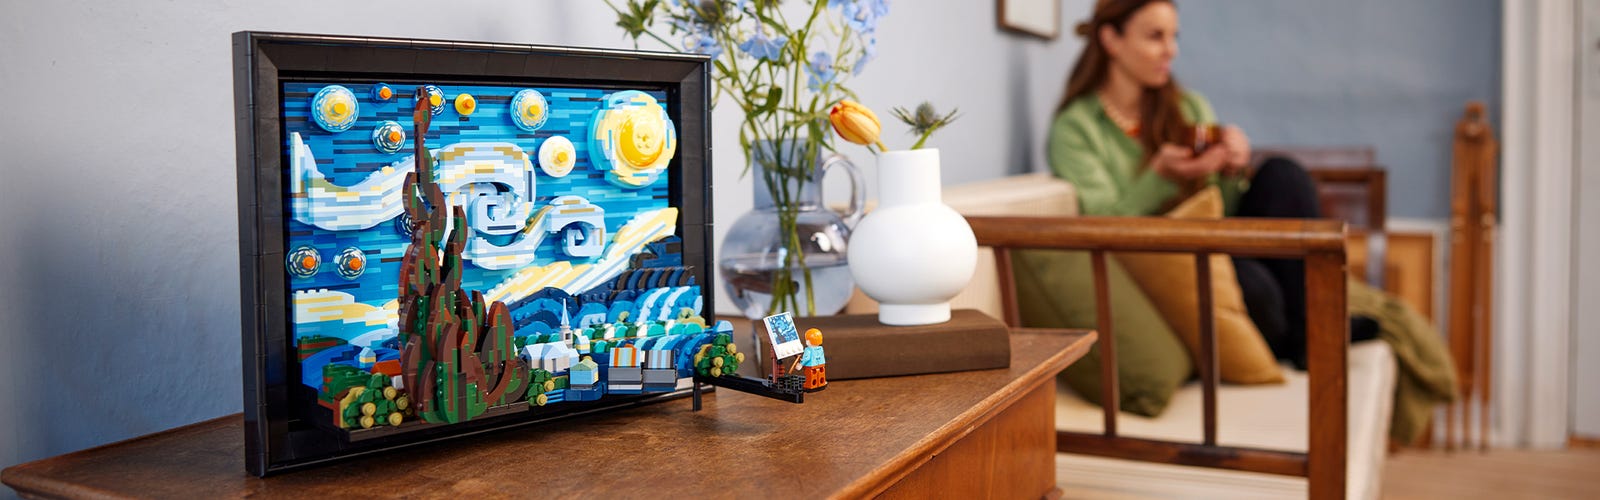 LEGO reveals 21333 Starry Night by Vincent van Gogh as next Ideas set  [News] - The Brothers Brick